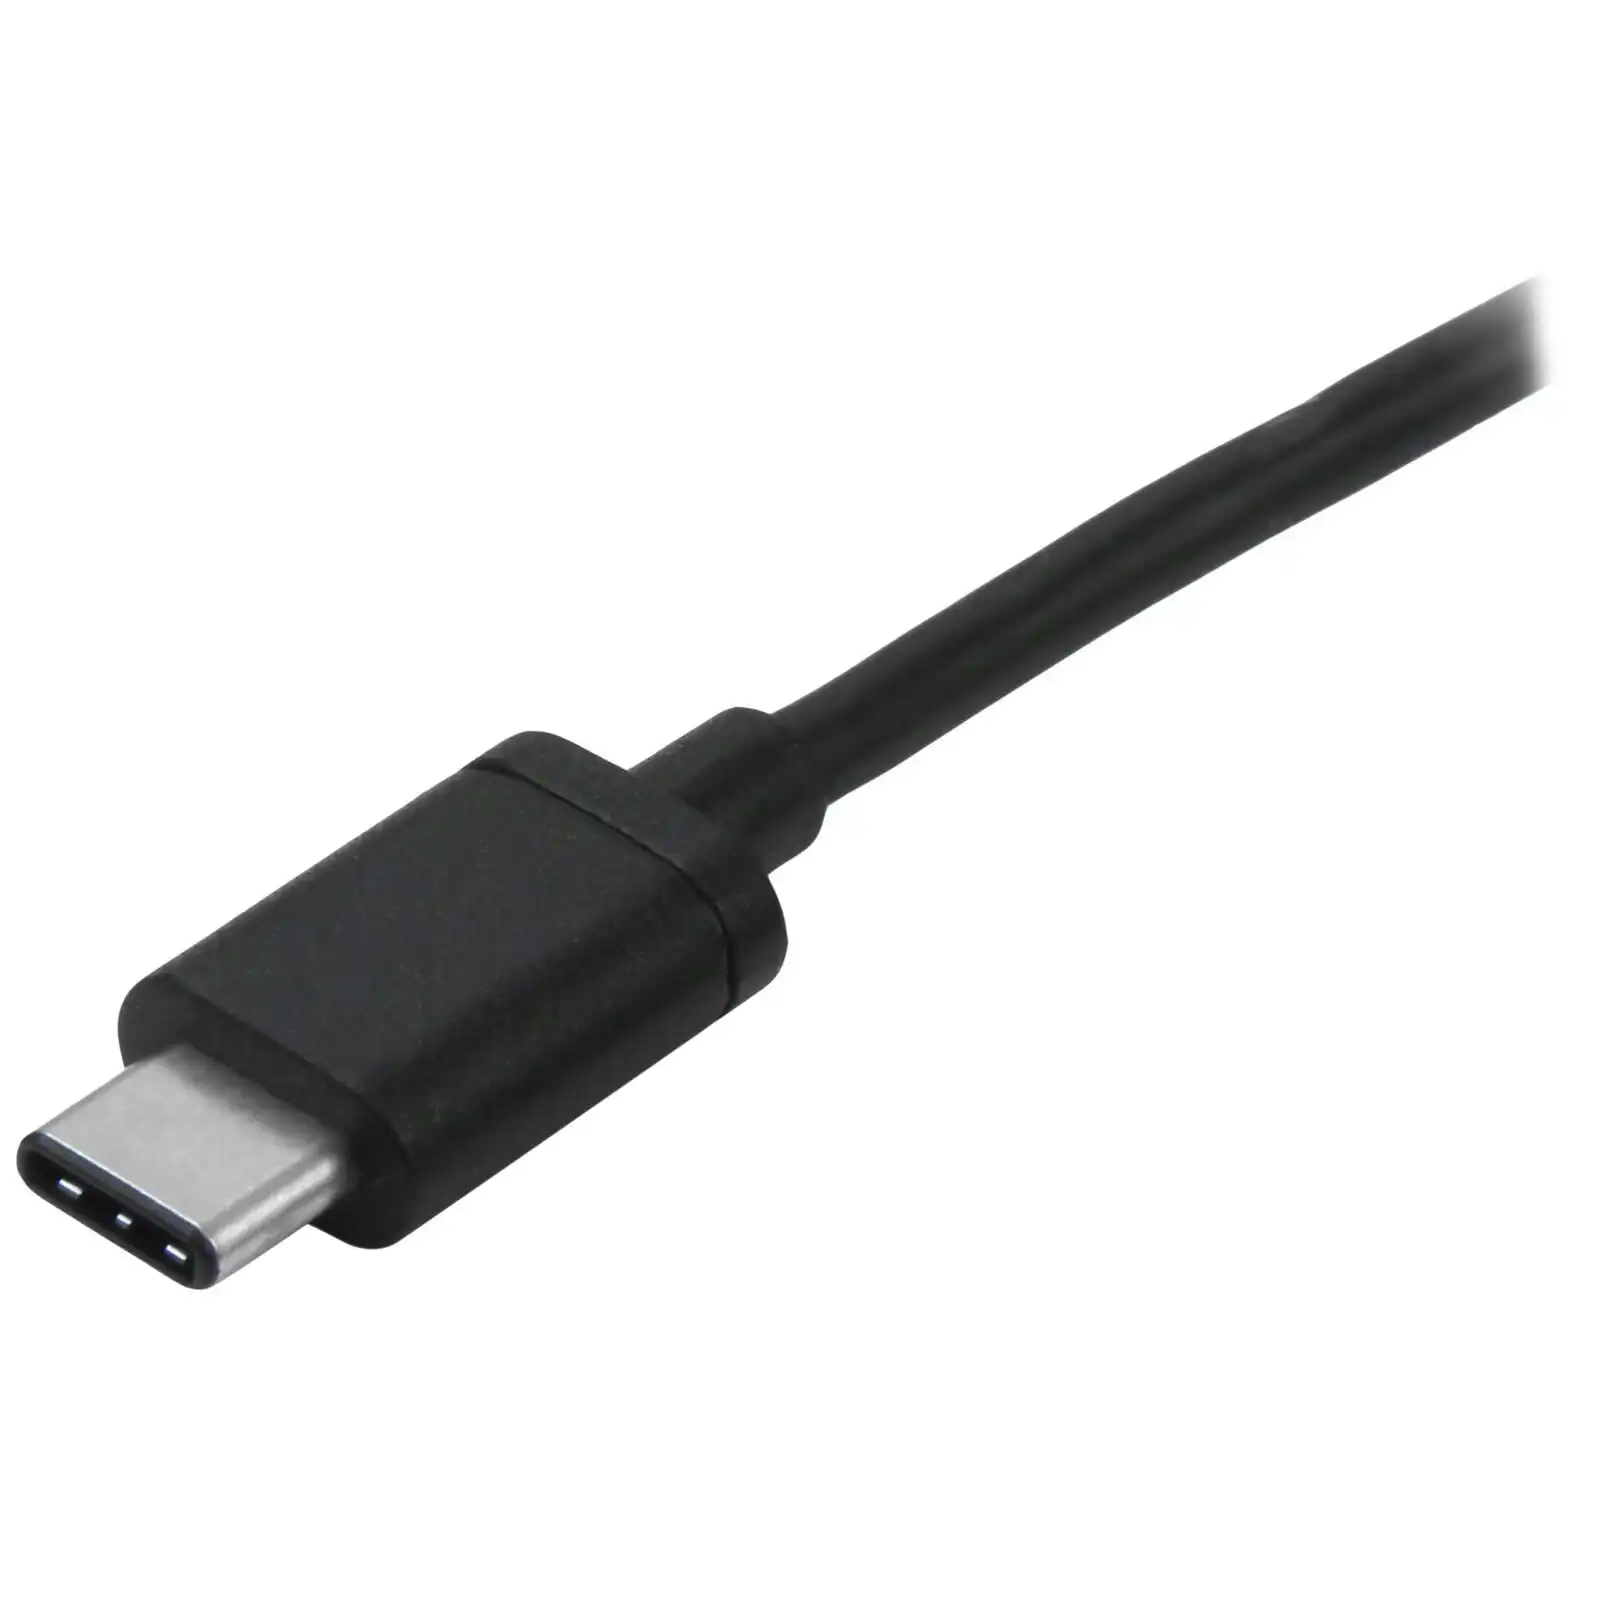 Star Tech 2m USB-C Cable Male To Male For USB-C Devices/Mac/ChromeBook Black